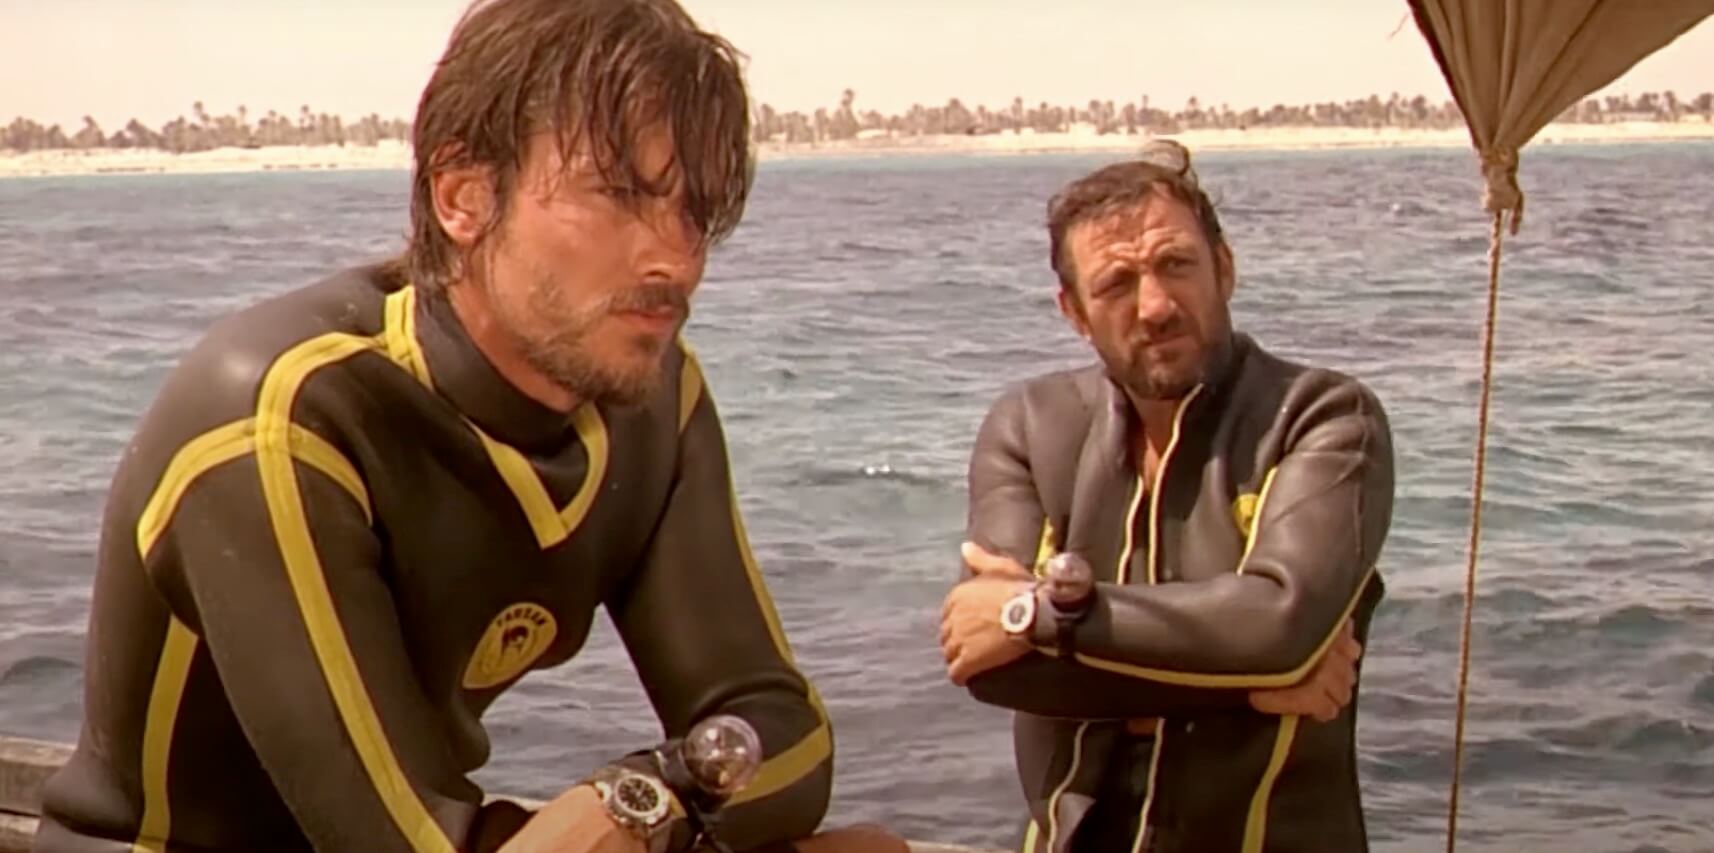 Alain Delon and Lino Ventura wearing a vintage Ultradive in "Les Aventuriers"